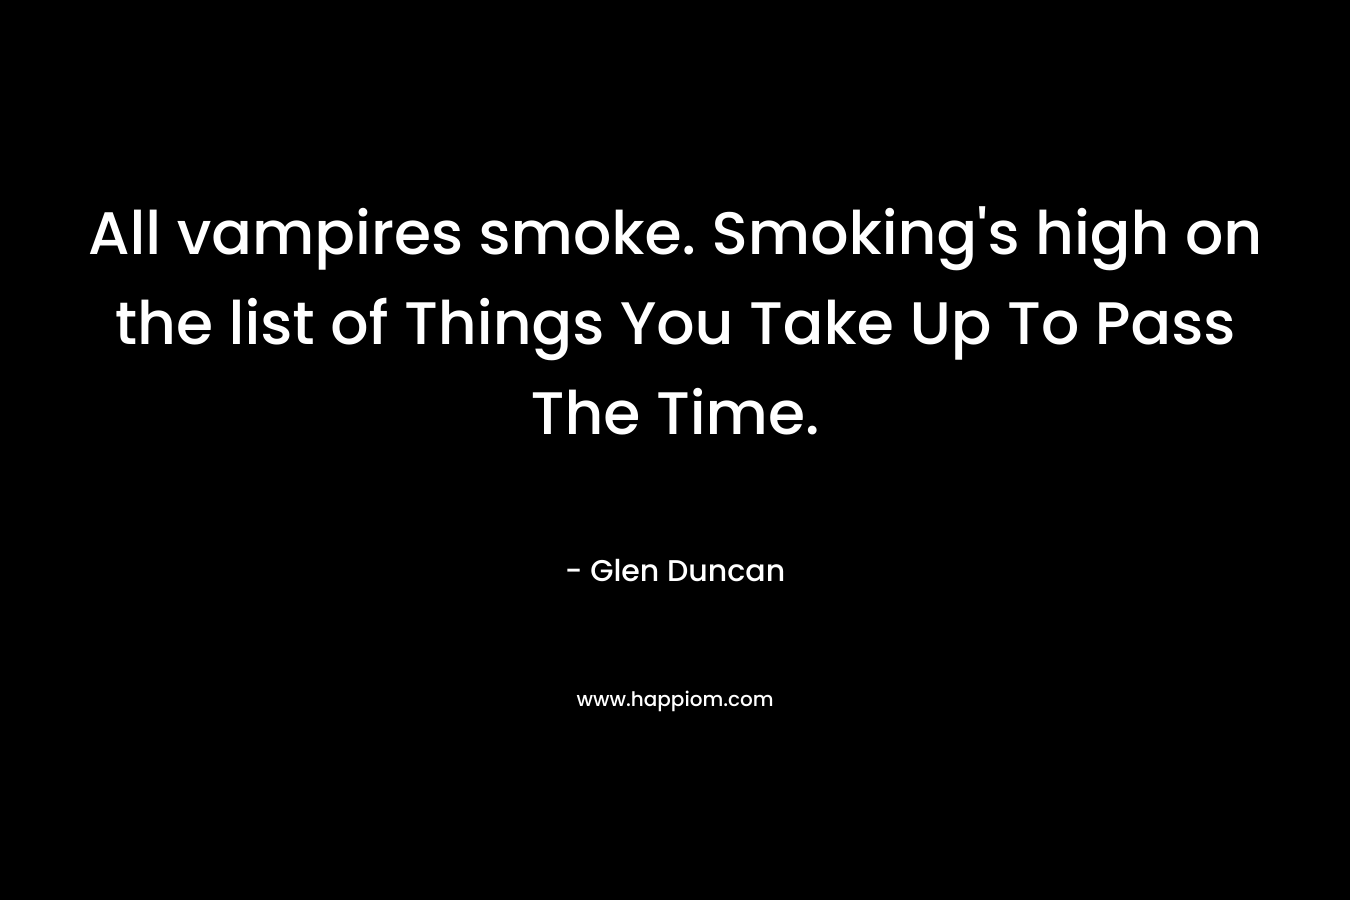 All vampires smoke. Smoking’s high on the list of Things You Take Up To Pass The Time. – Glen Duncan